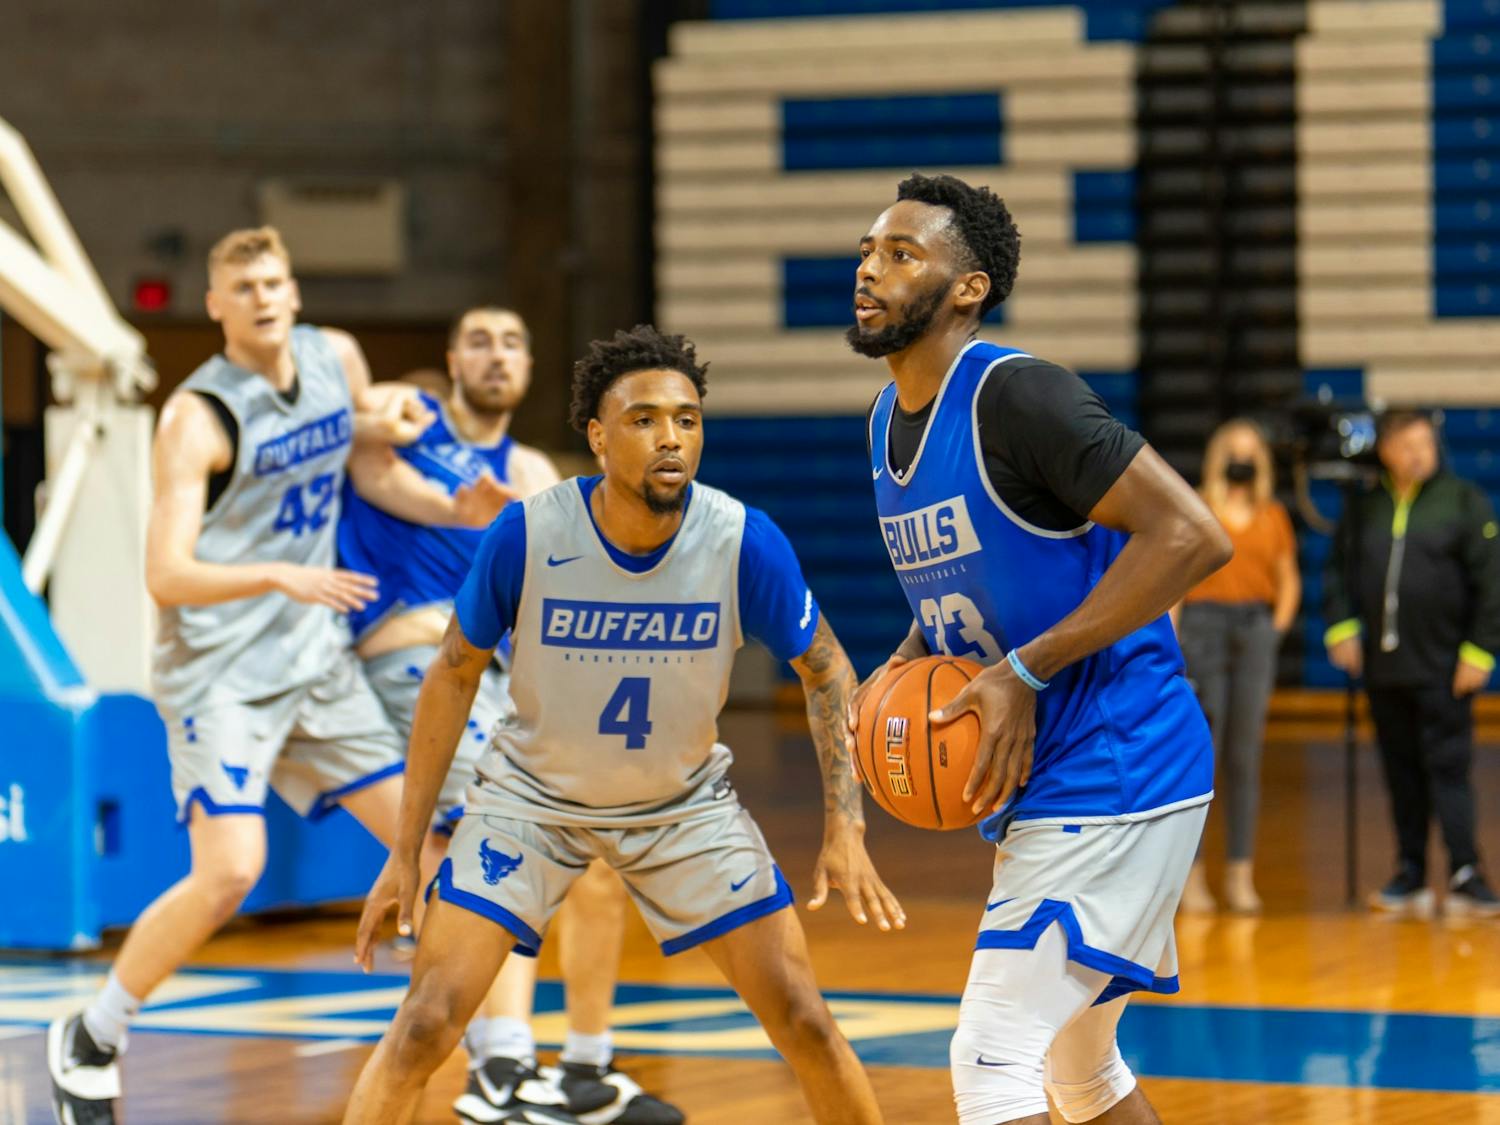 UB guard Maceo Jack (33) is guarded by guard Keishawn Brewton (4) at men’s basketball practice last week.